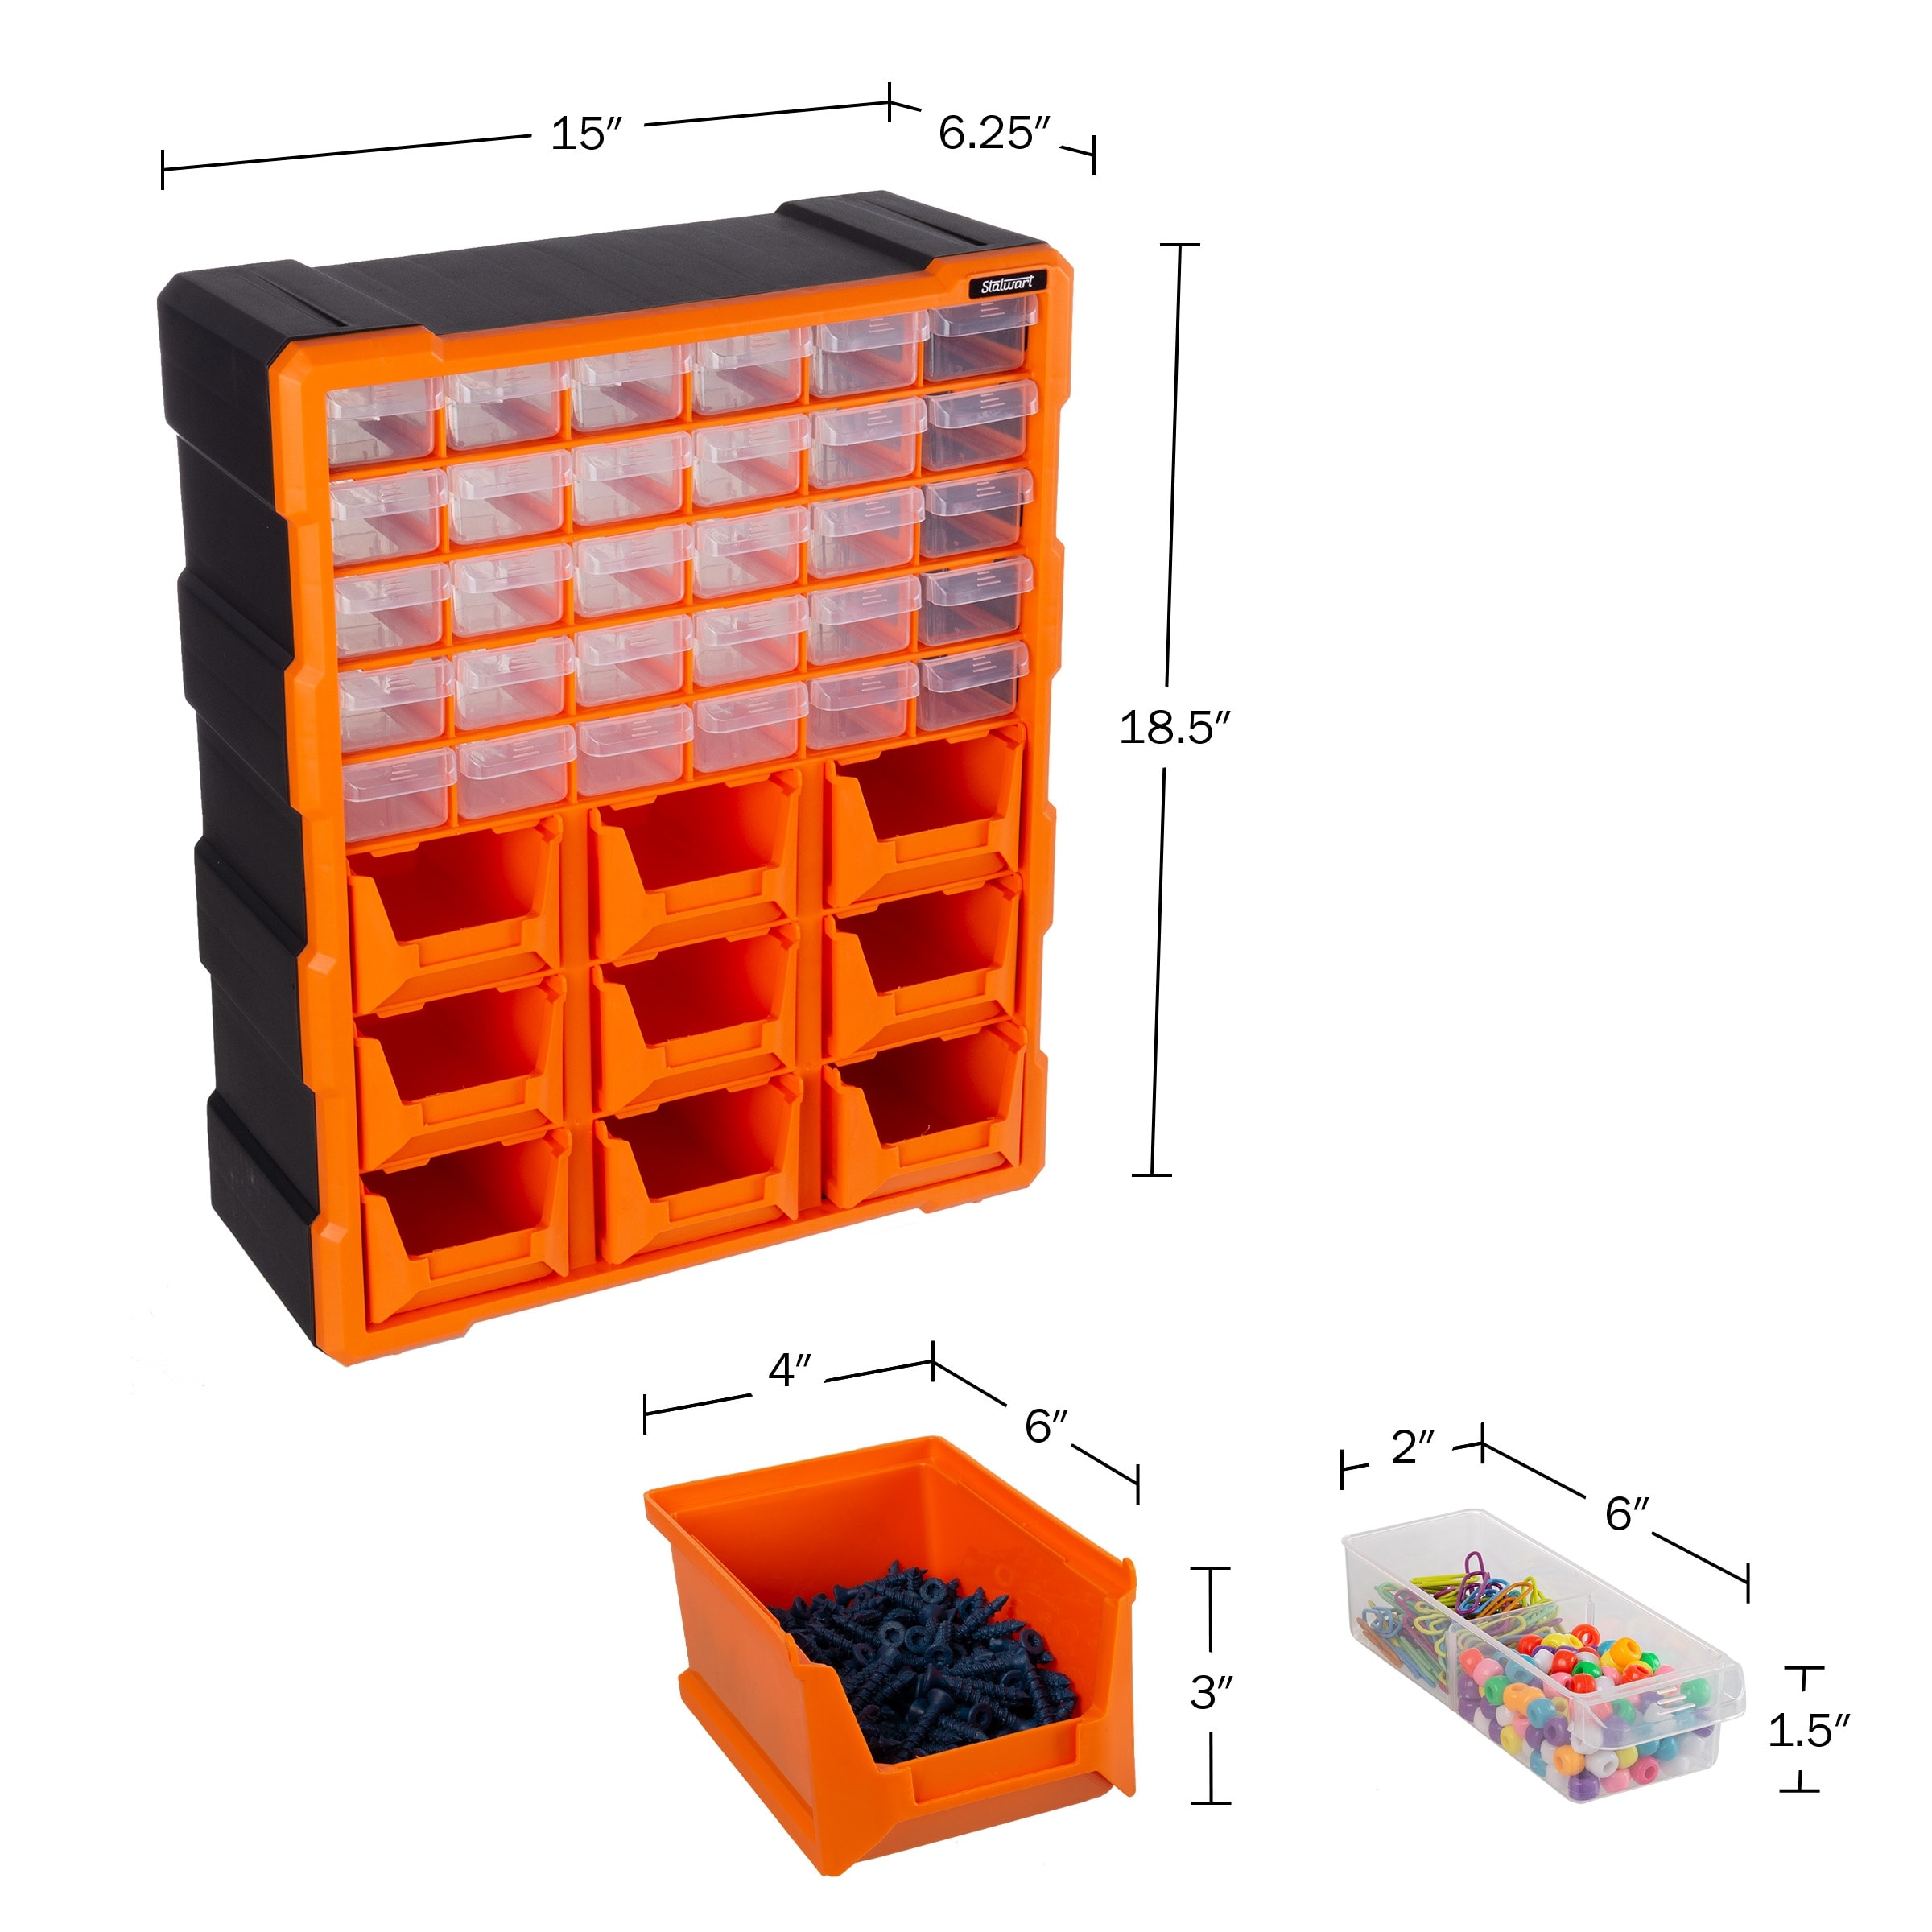 Deluxe 42 Drawer Compartment Storage Box by Stalwart